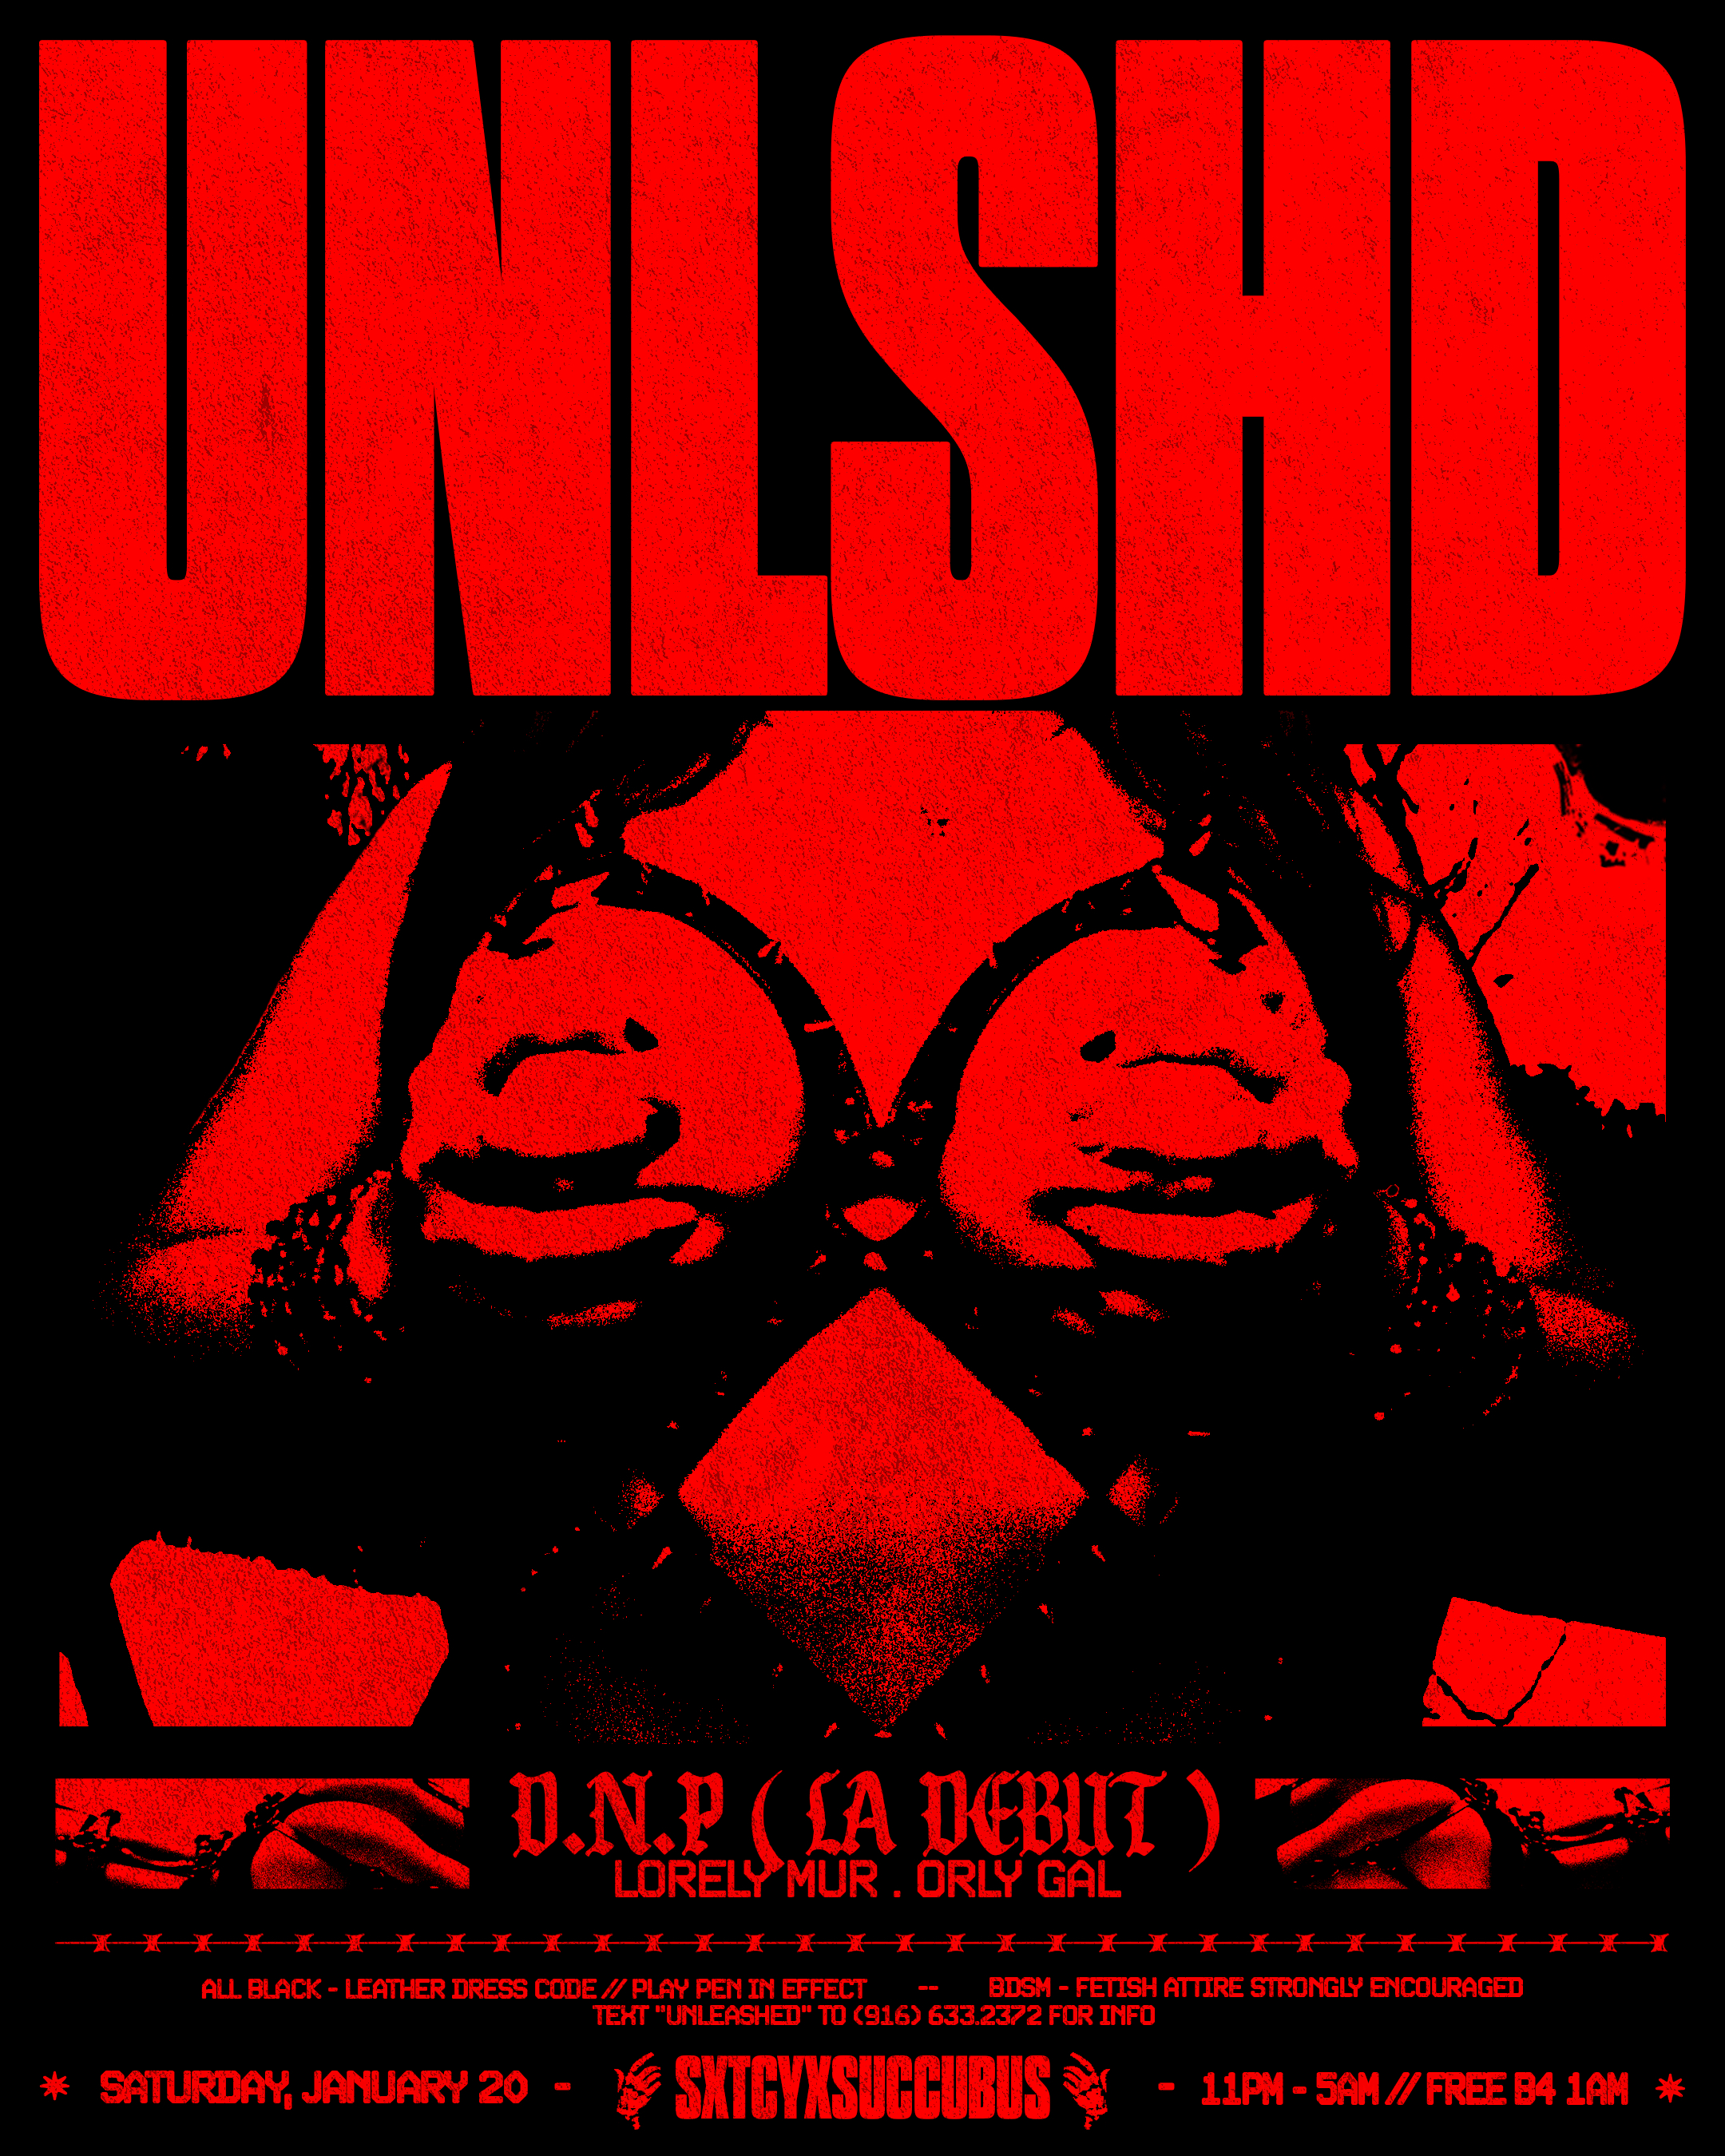 SXTCY x Succubus present: UNLSHD feat. D.N.P (LA DEBUT), Lorely Mur, & Orly Gal - フライヤー表